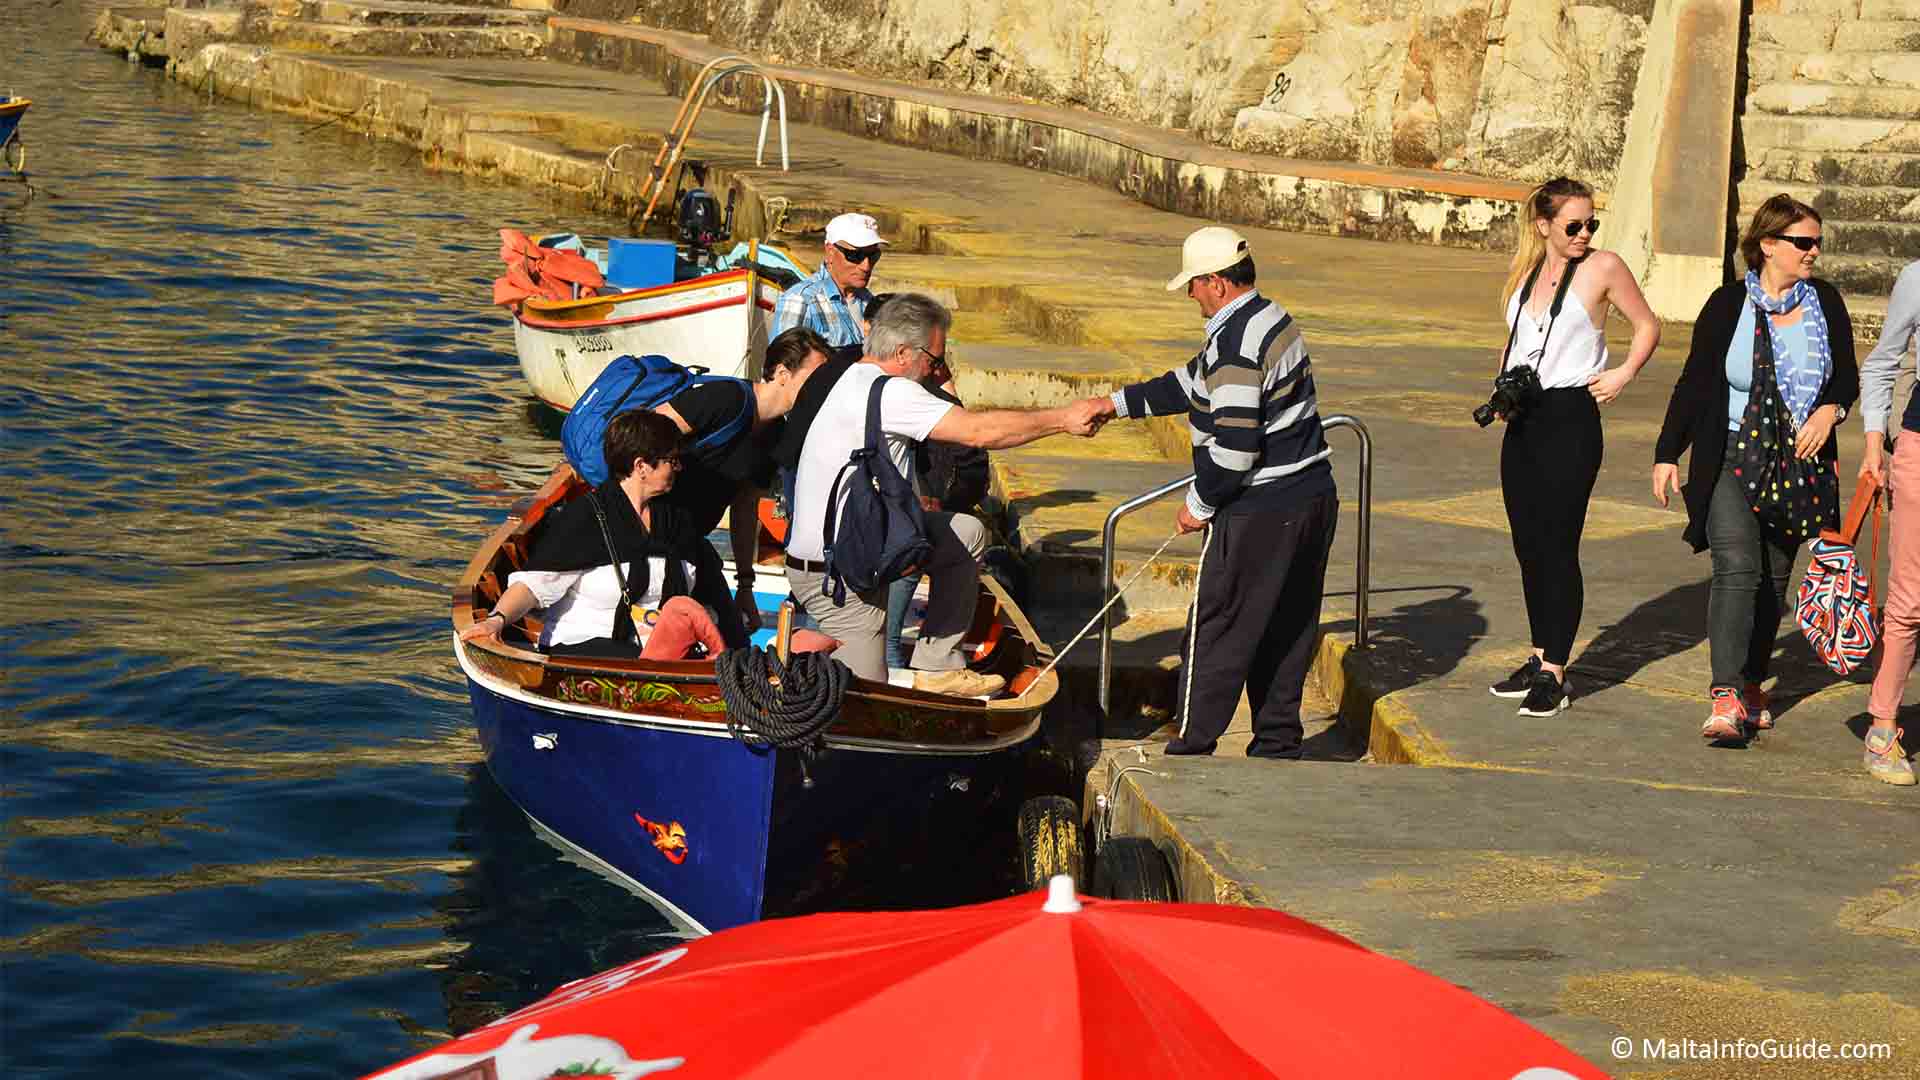 Tourists disembarking the boat after a trip to the caves